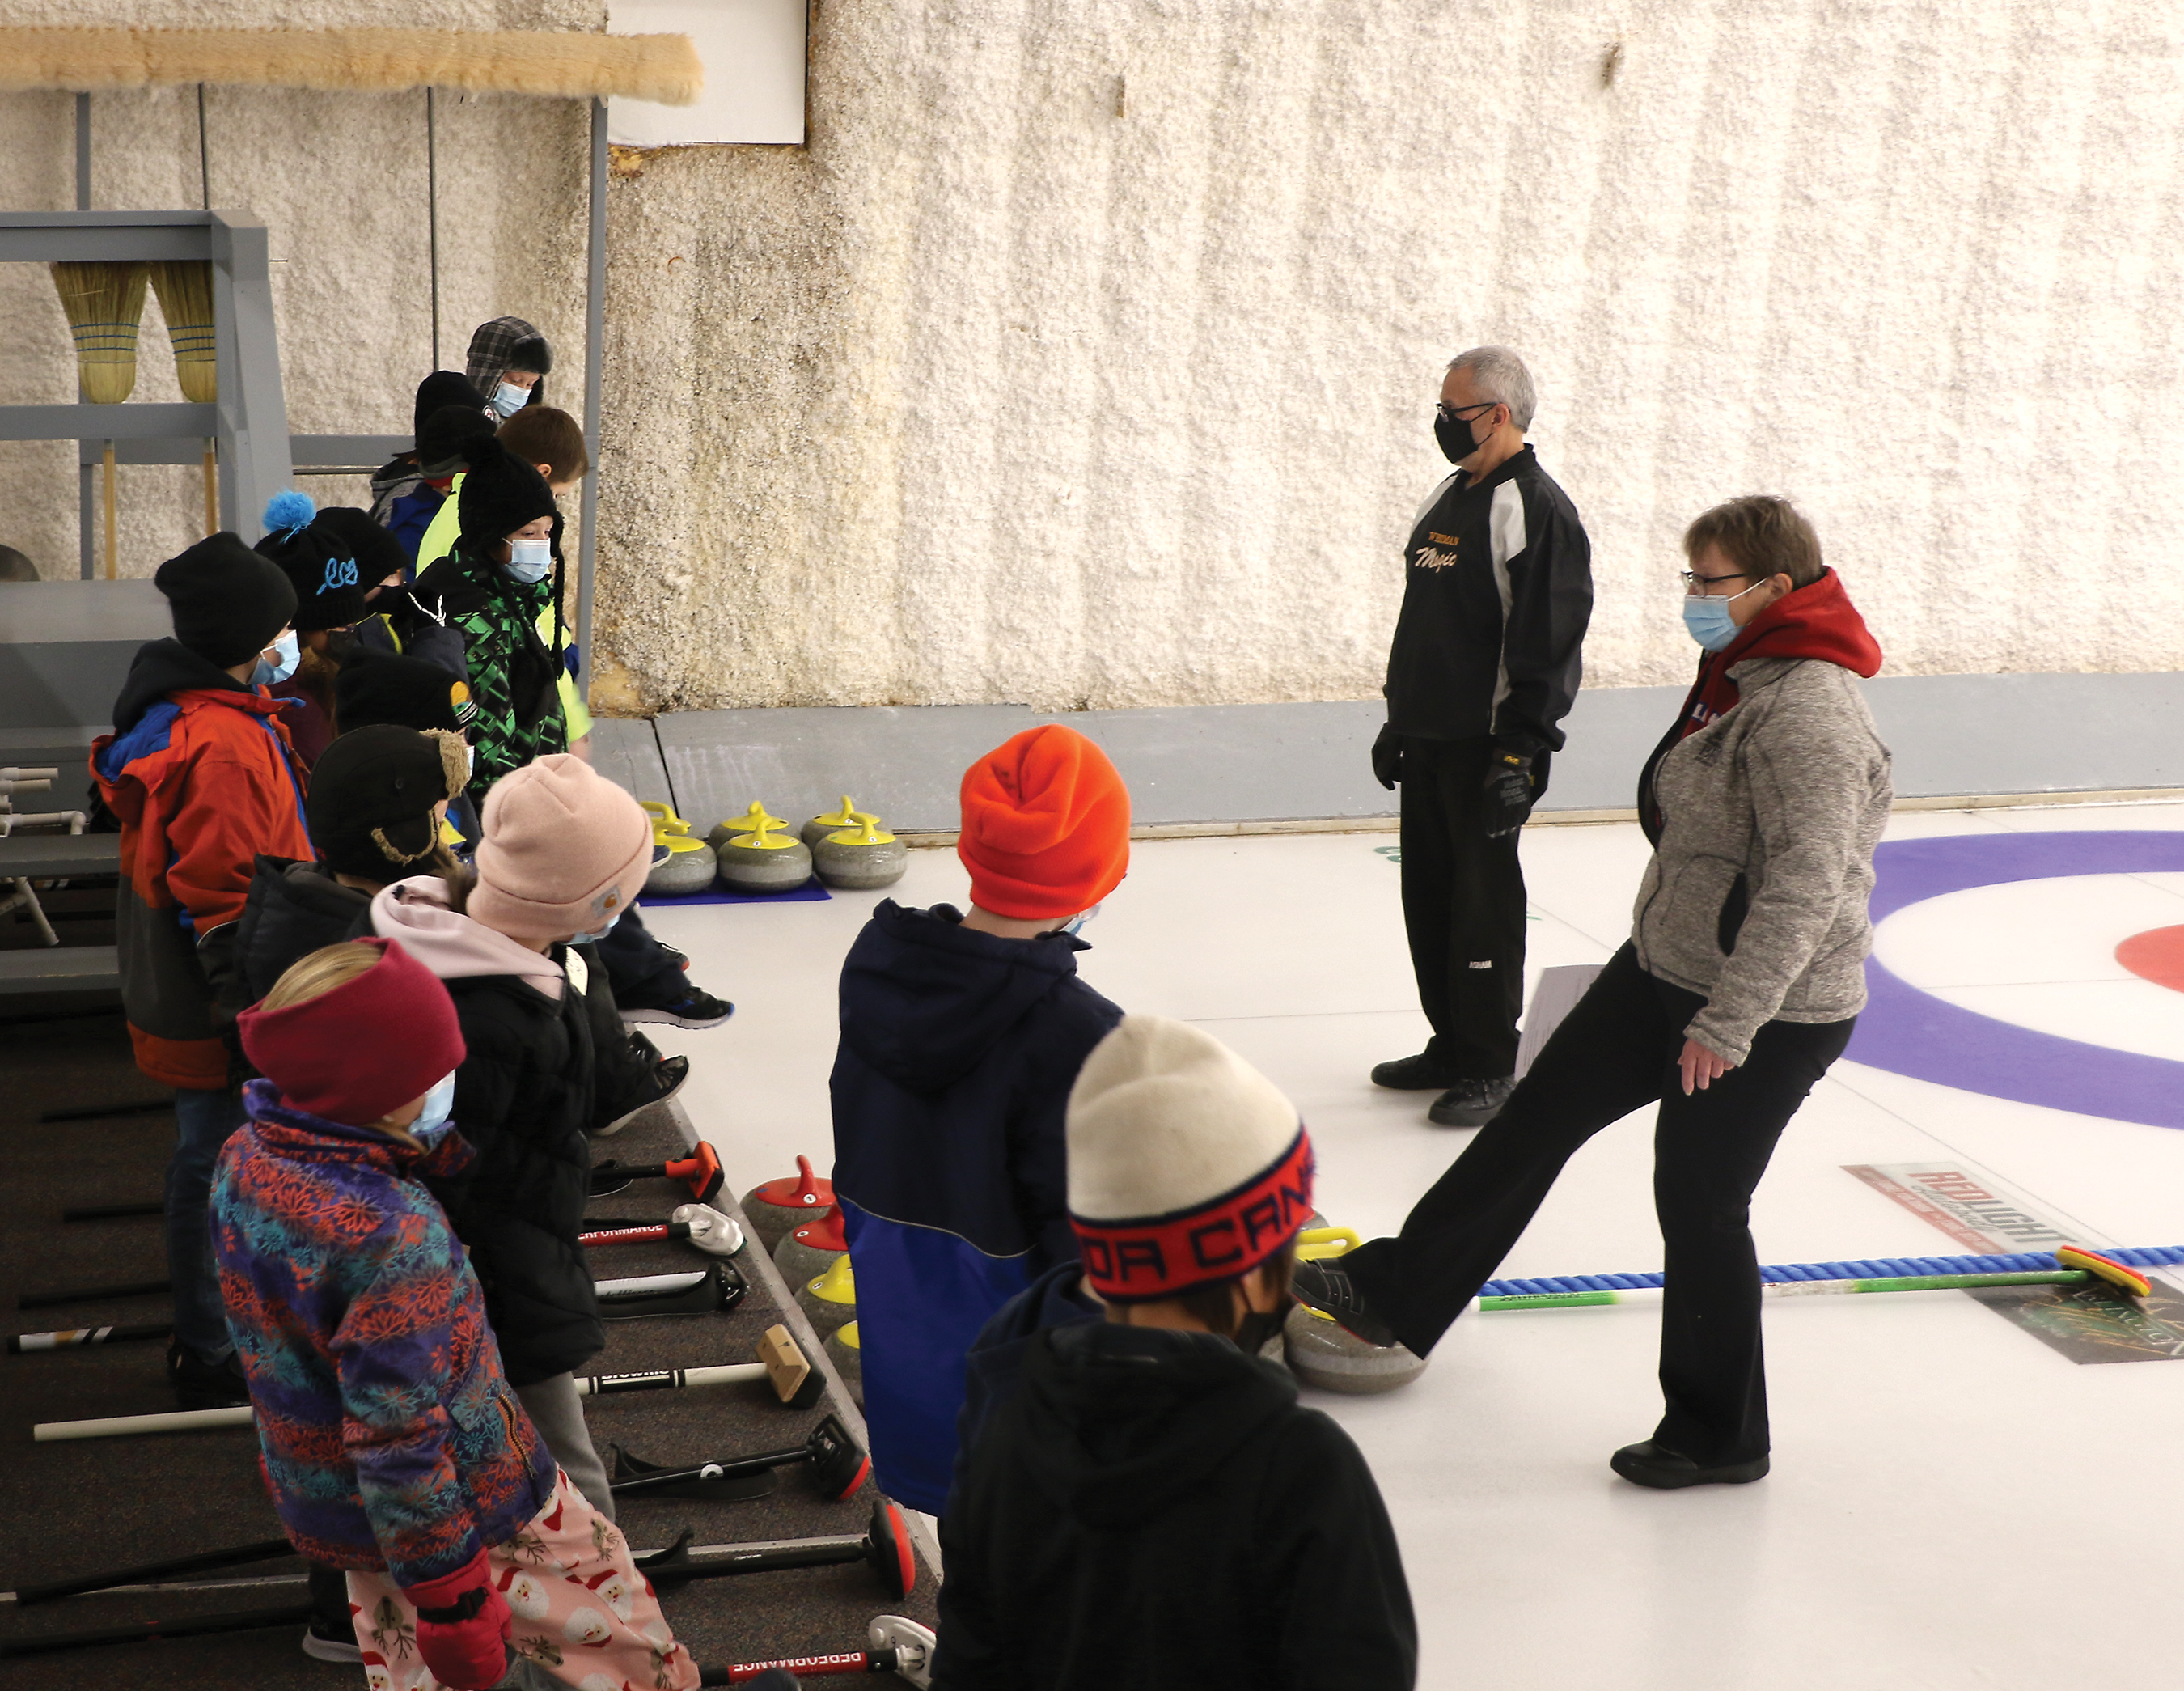 Curling instructor Barb Swallow demonstrating how to balance your feet on the ice to grades three and four students from Maryfield School.